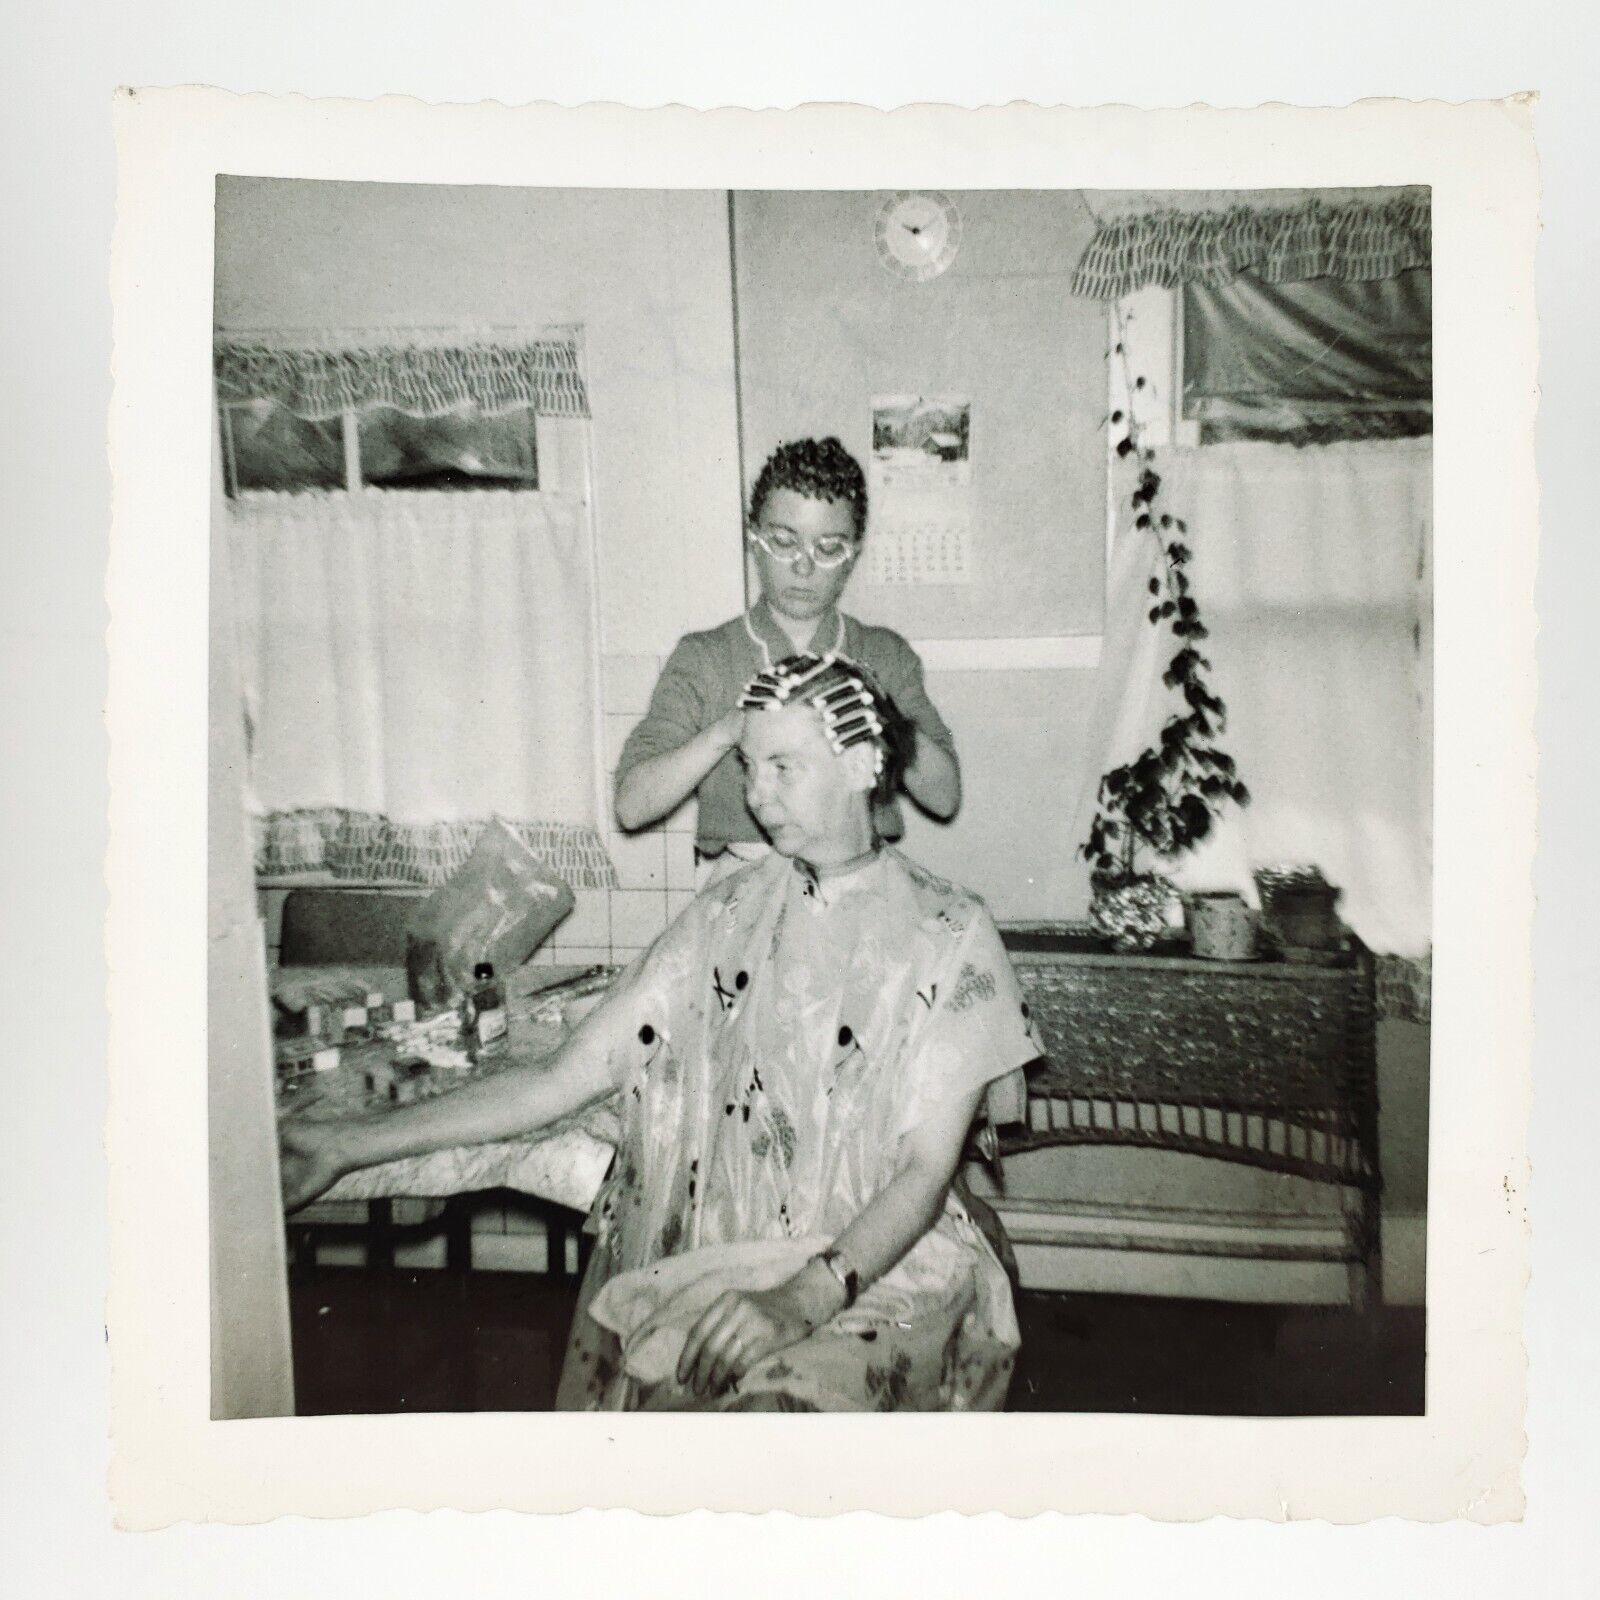 Lady Placing Hair Curlers Photo 1950s Spa Day DIY Hairdresser Snapshot A4294